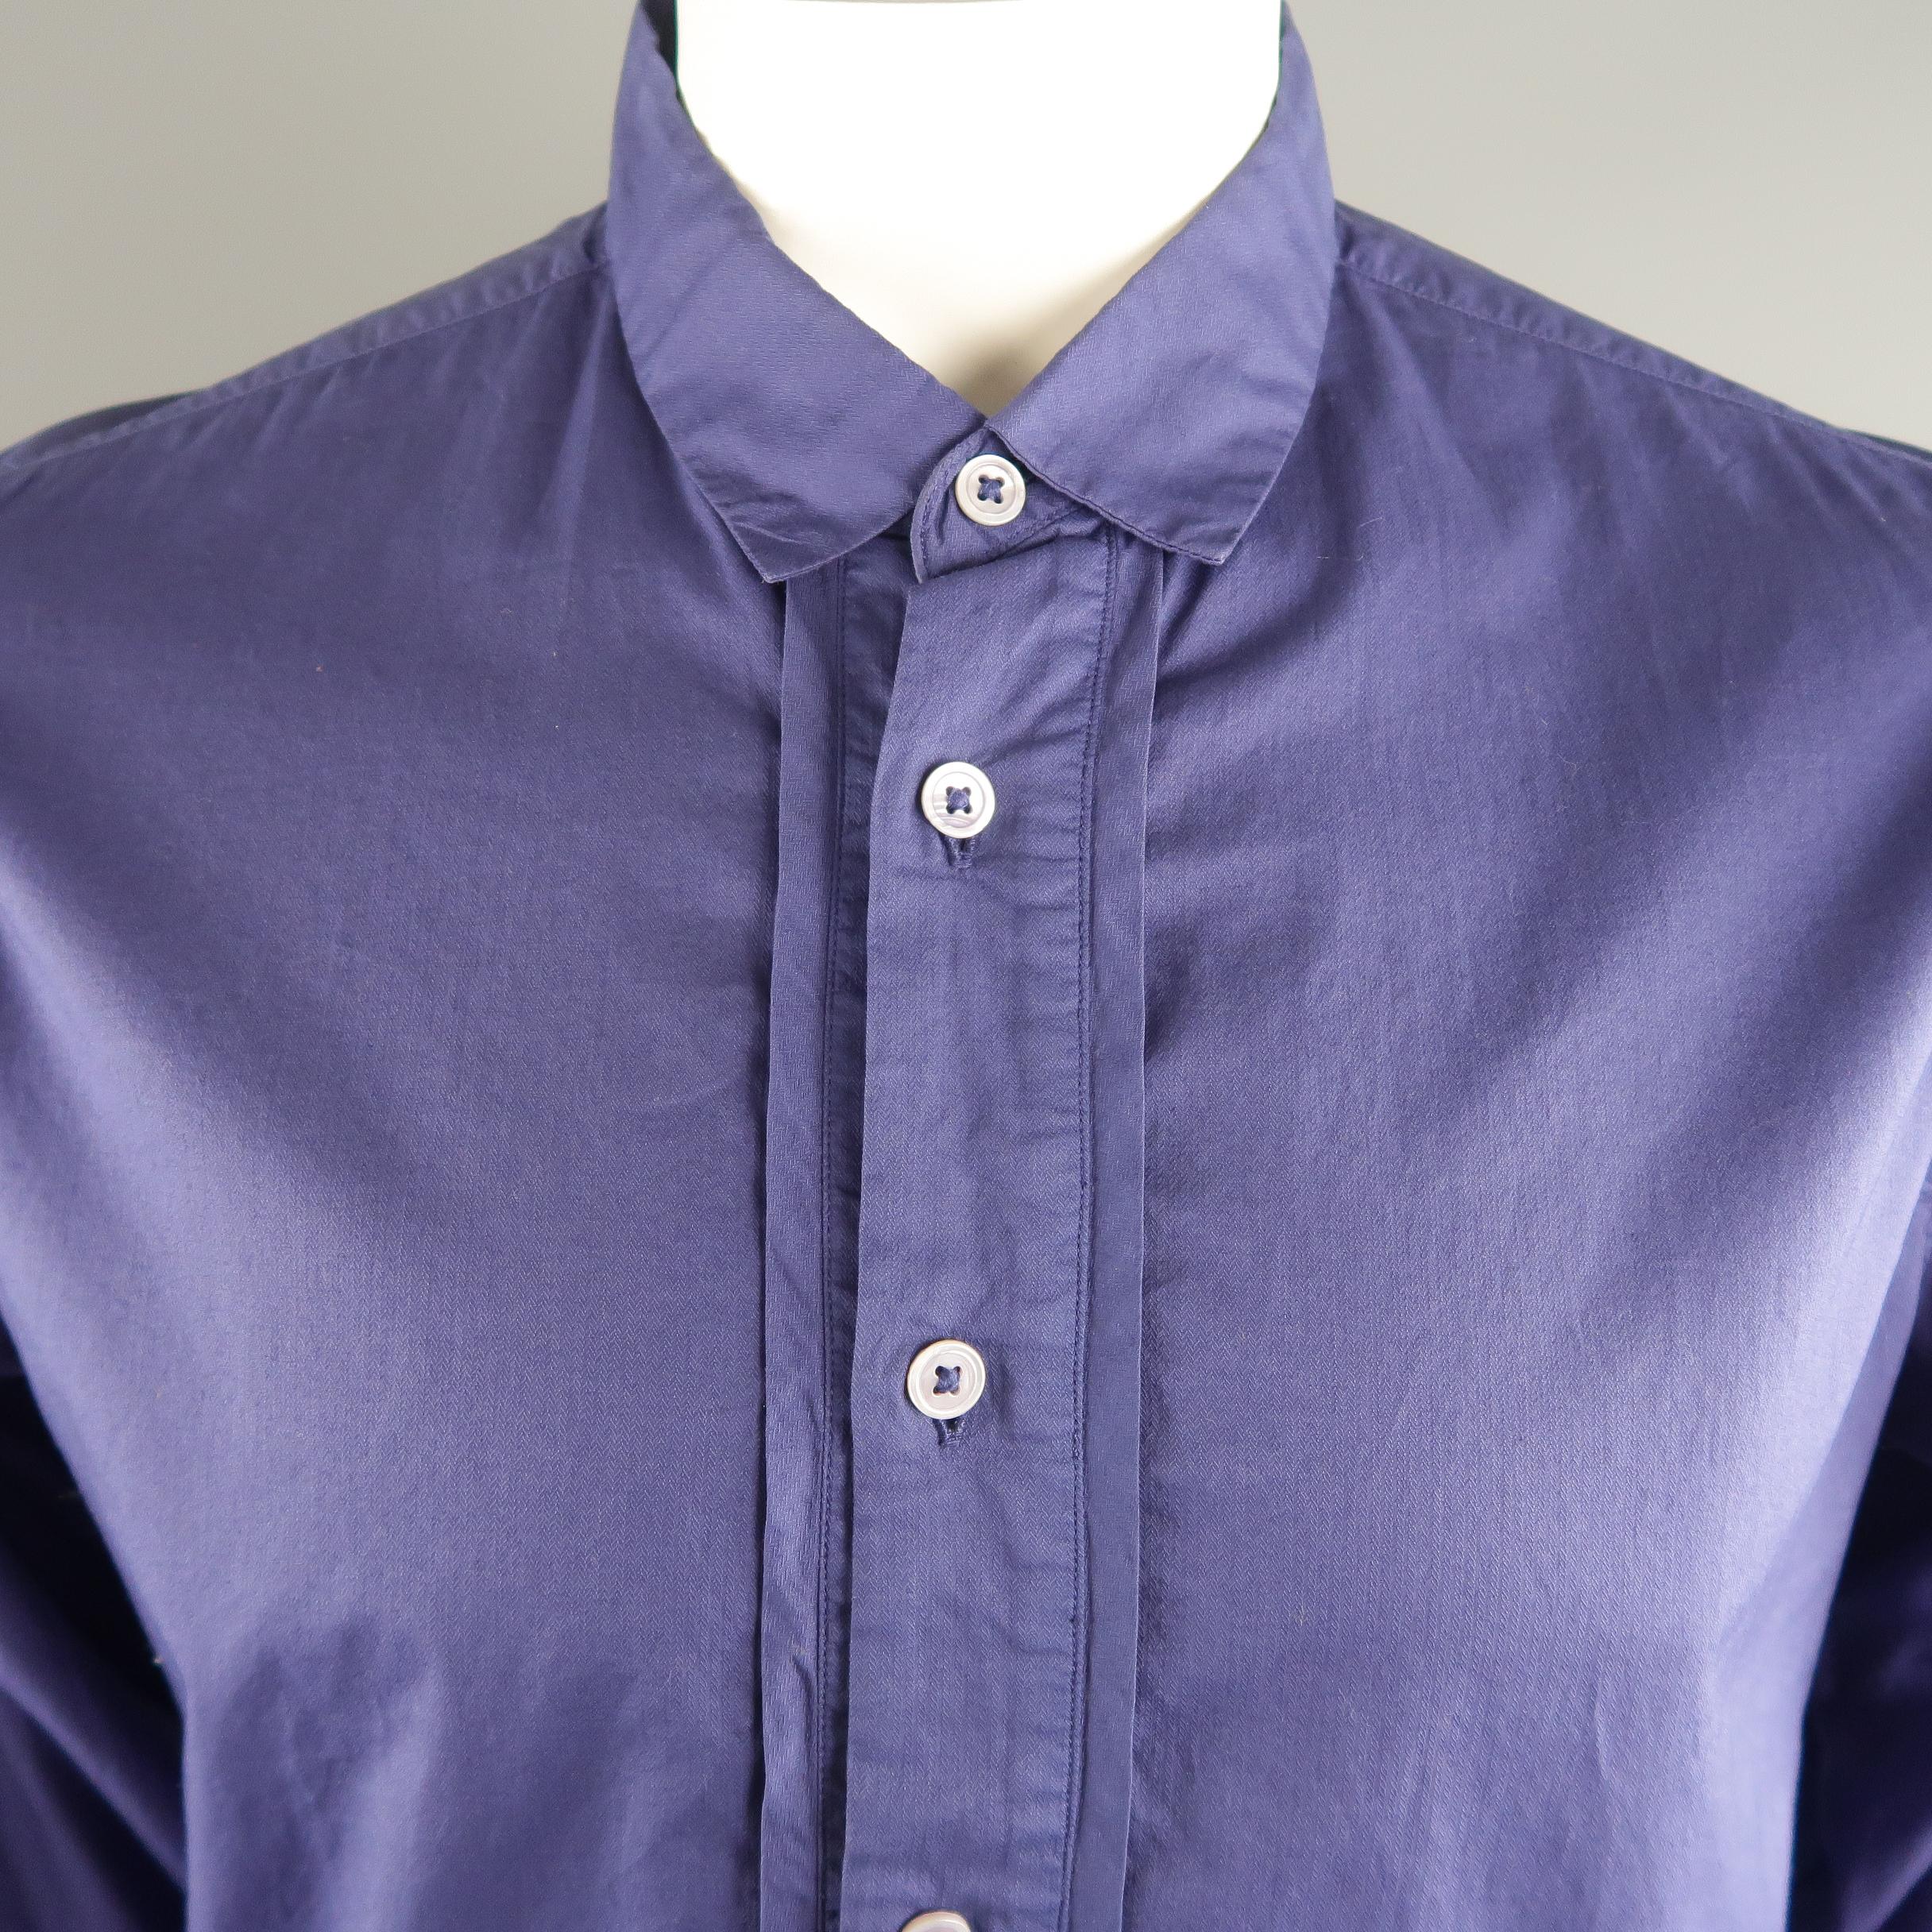 ANN DEMEULEMEESTER long sleeve shirt comes in purple tone in a solid cotton material, with a detailed closure, small collar and French cuffs. Light ironing marks at collar. Made in Tunisia.
 
Good Pre-Owned Condition.
Marked: XL
 
Measurements:
